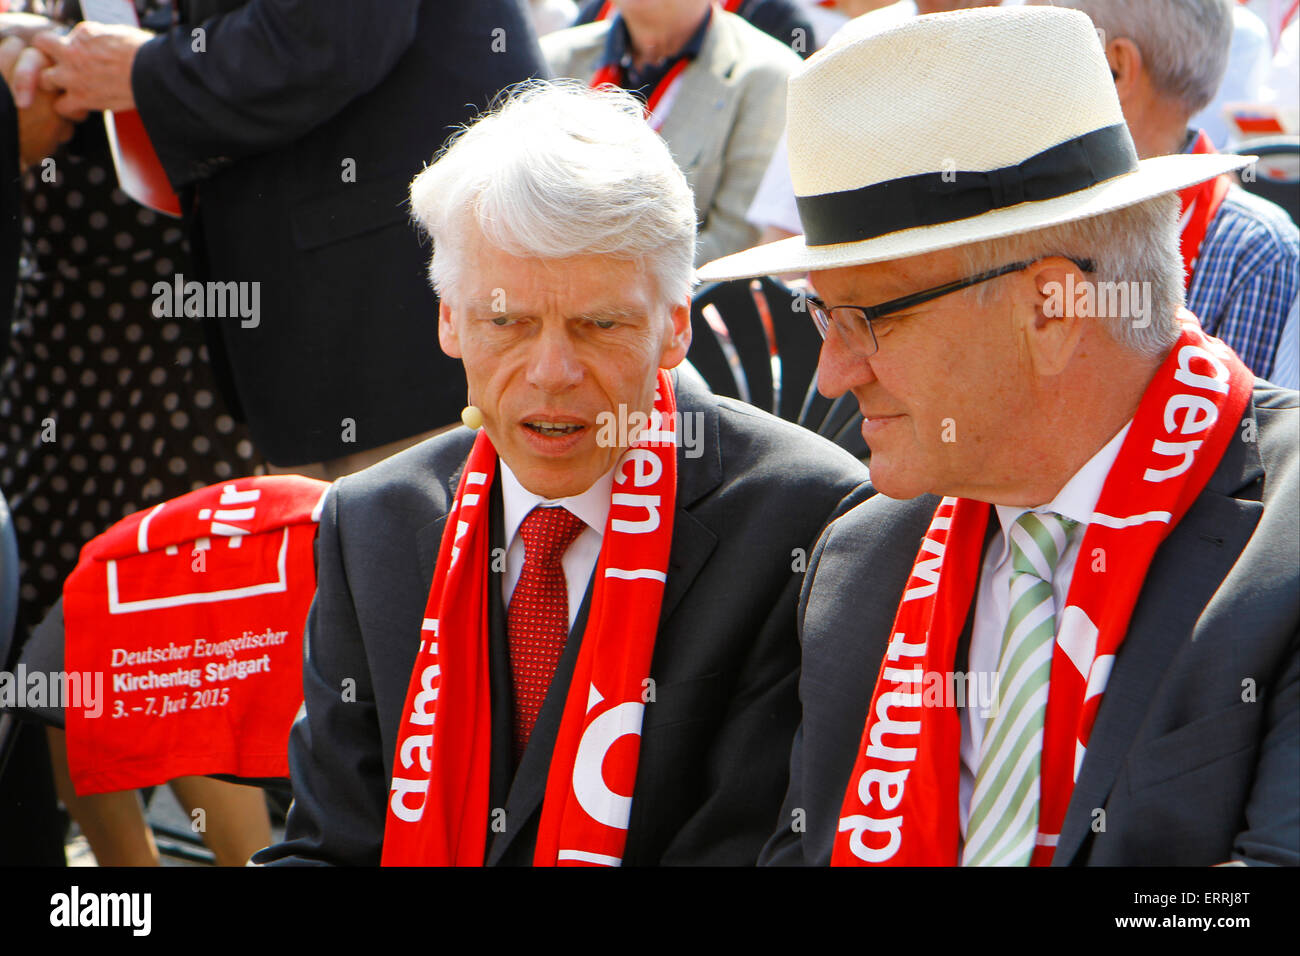 Winfried Kretschmann, the Minister-President of Baden-Württemberg, talks with the President of the German Protestant Church Congress, Andreas Barner, at the closing service of the 35th the German Protestant Church Congress. © Michael Debets/Pacific Press/Alamy Live News Stock Photo